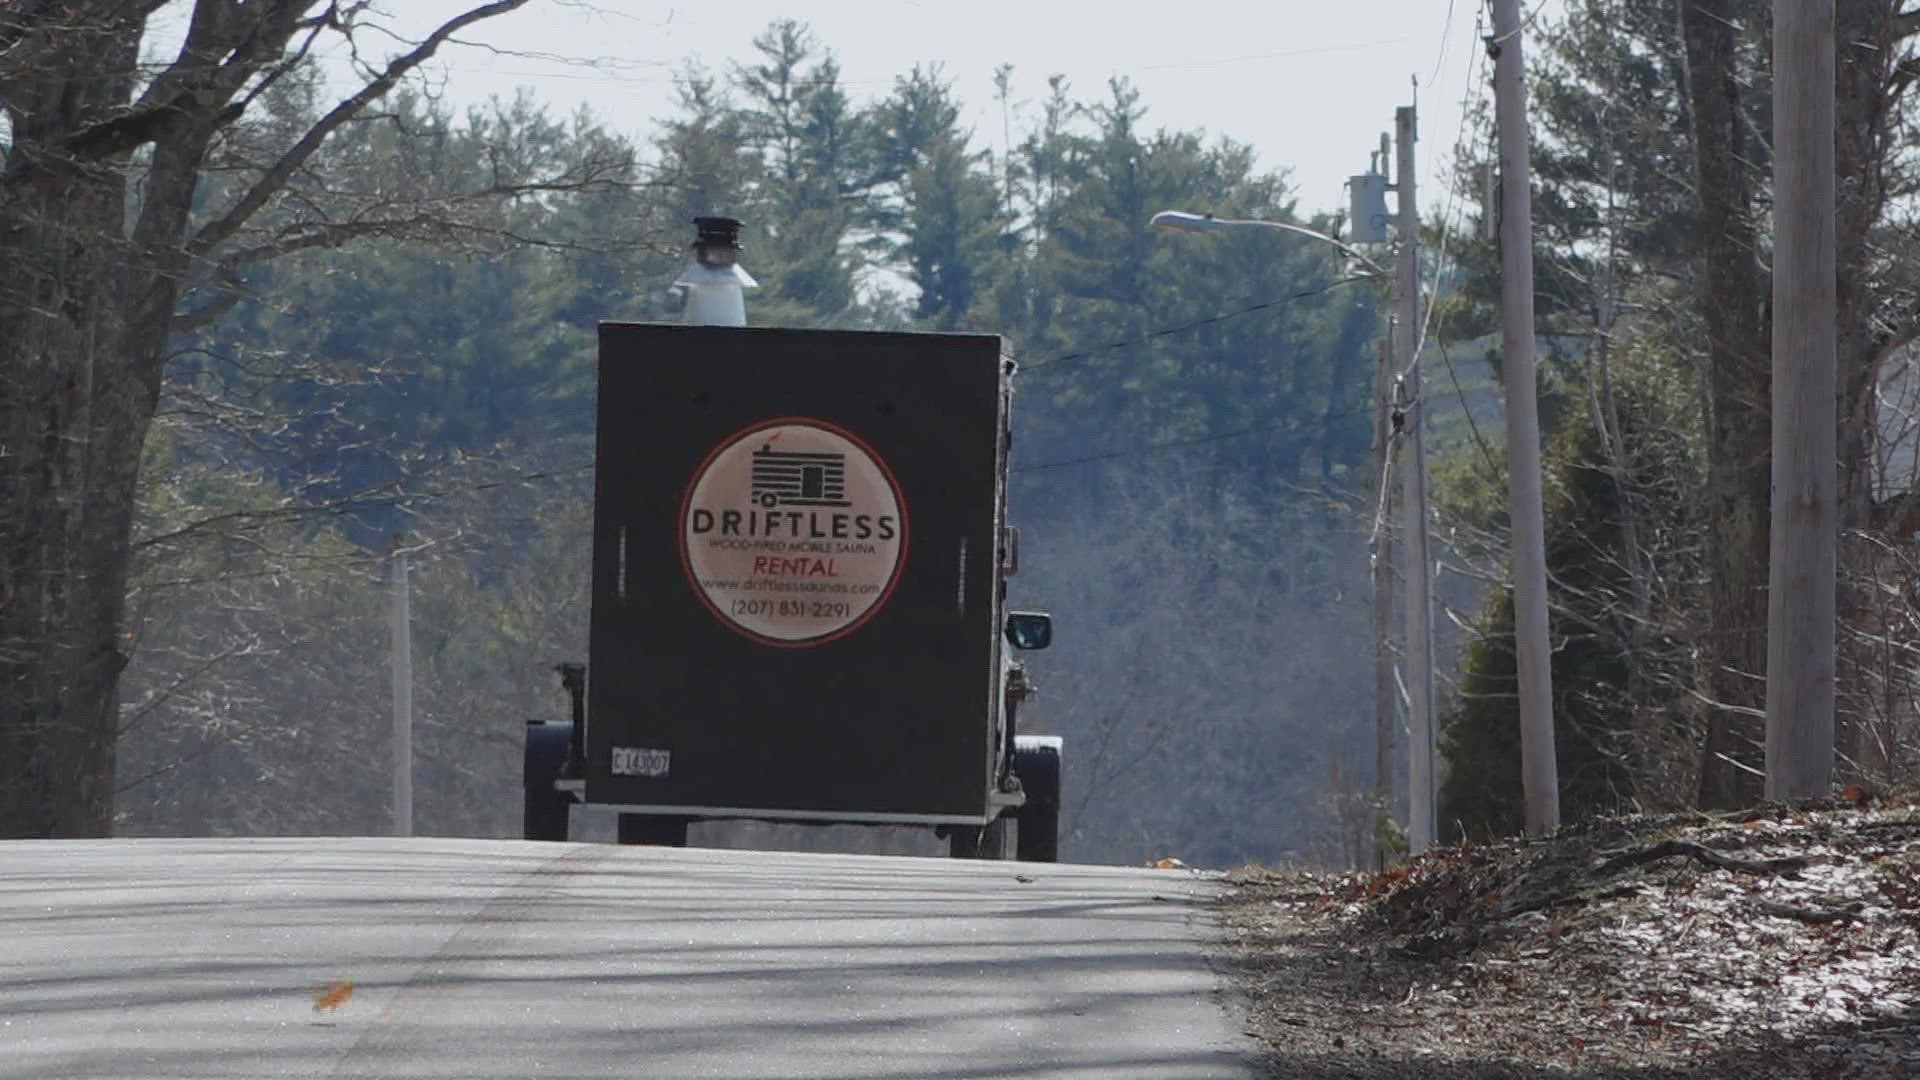 A Maine couple started Driftless Sauna, a mobile sauna business that they deliver to people's doors.